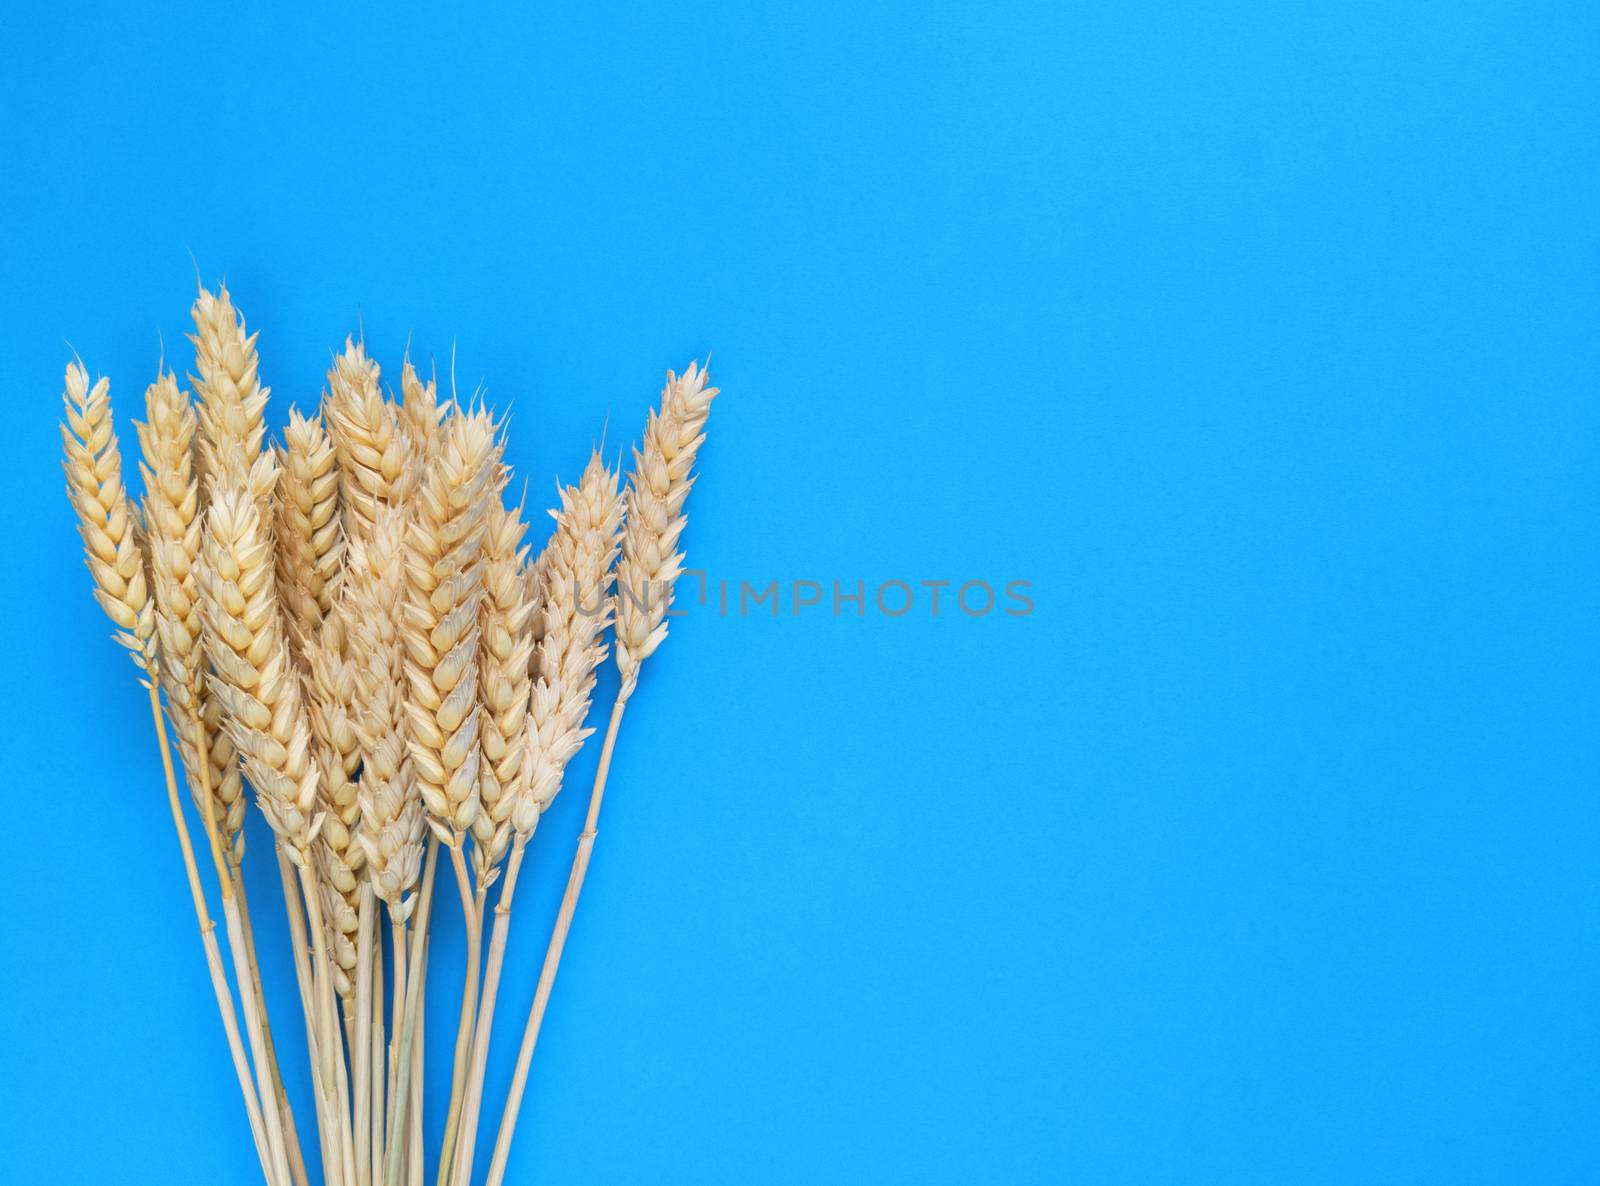 Spikelets of wheat on a blue background. Simple flat lay with copy space. Stock photography.